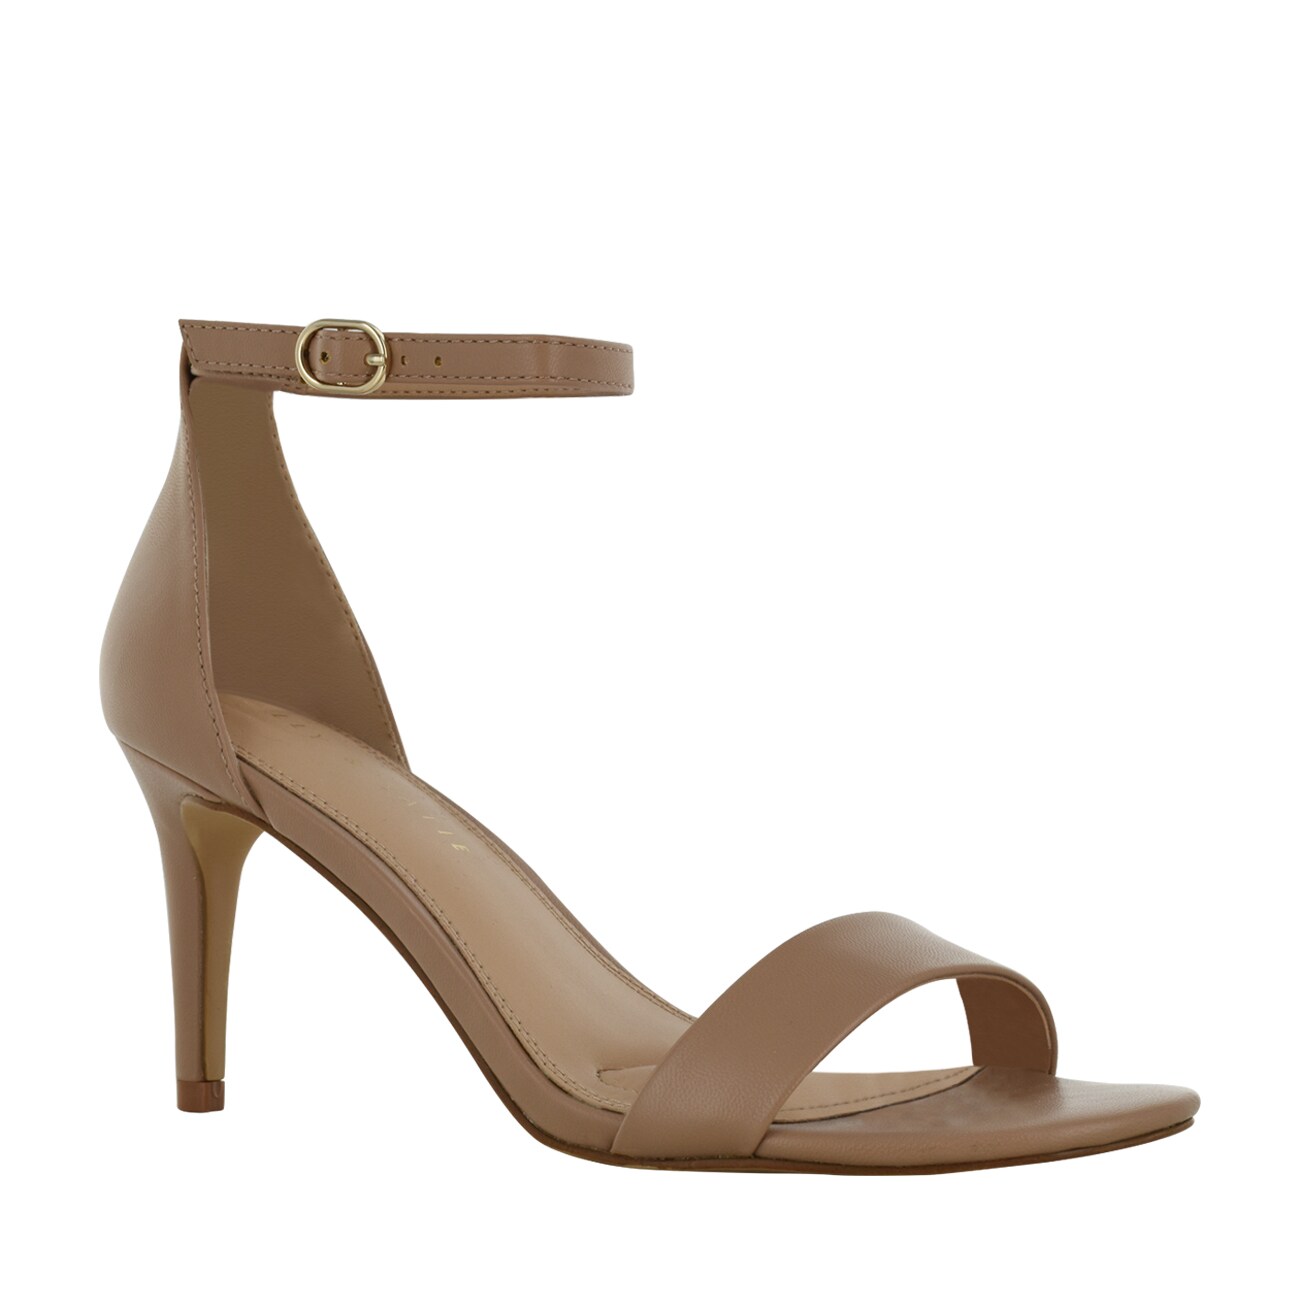 kelly and katie kirstie sandal gold